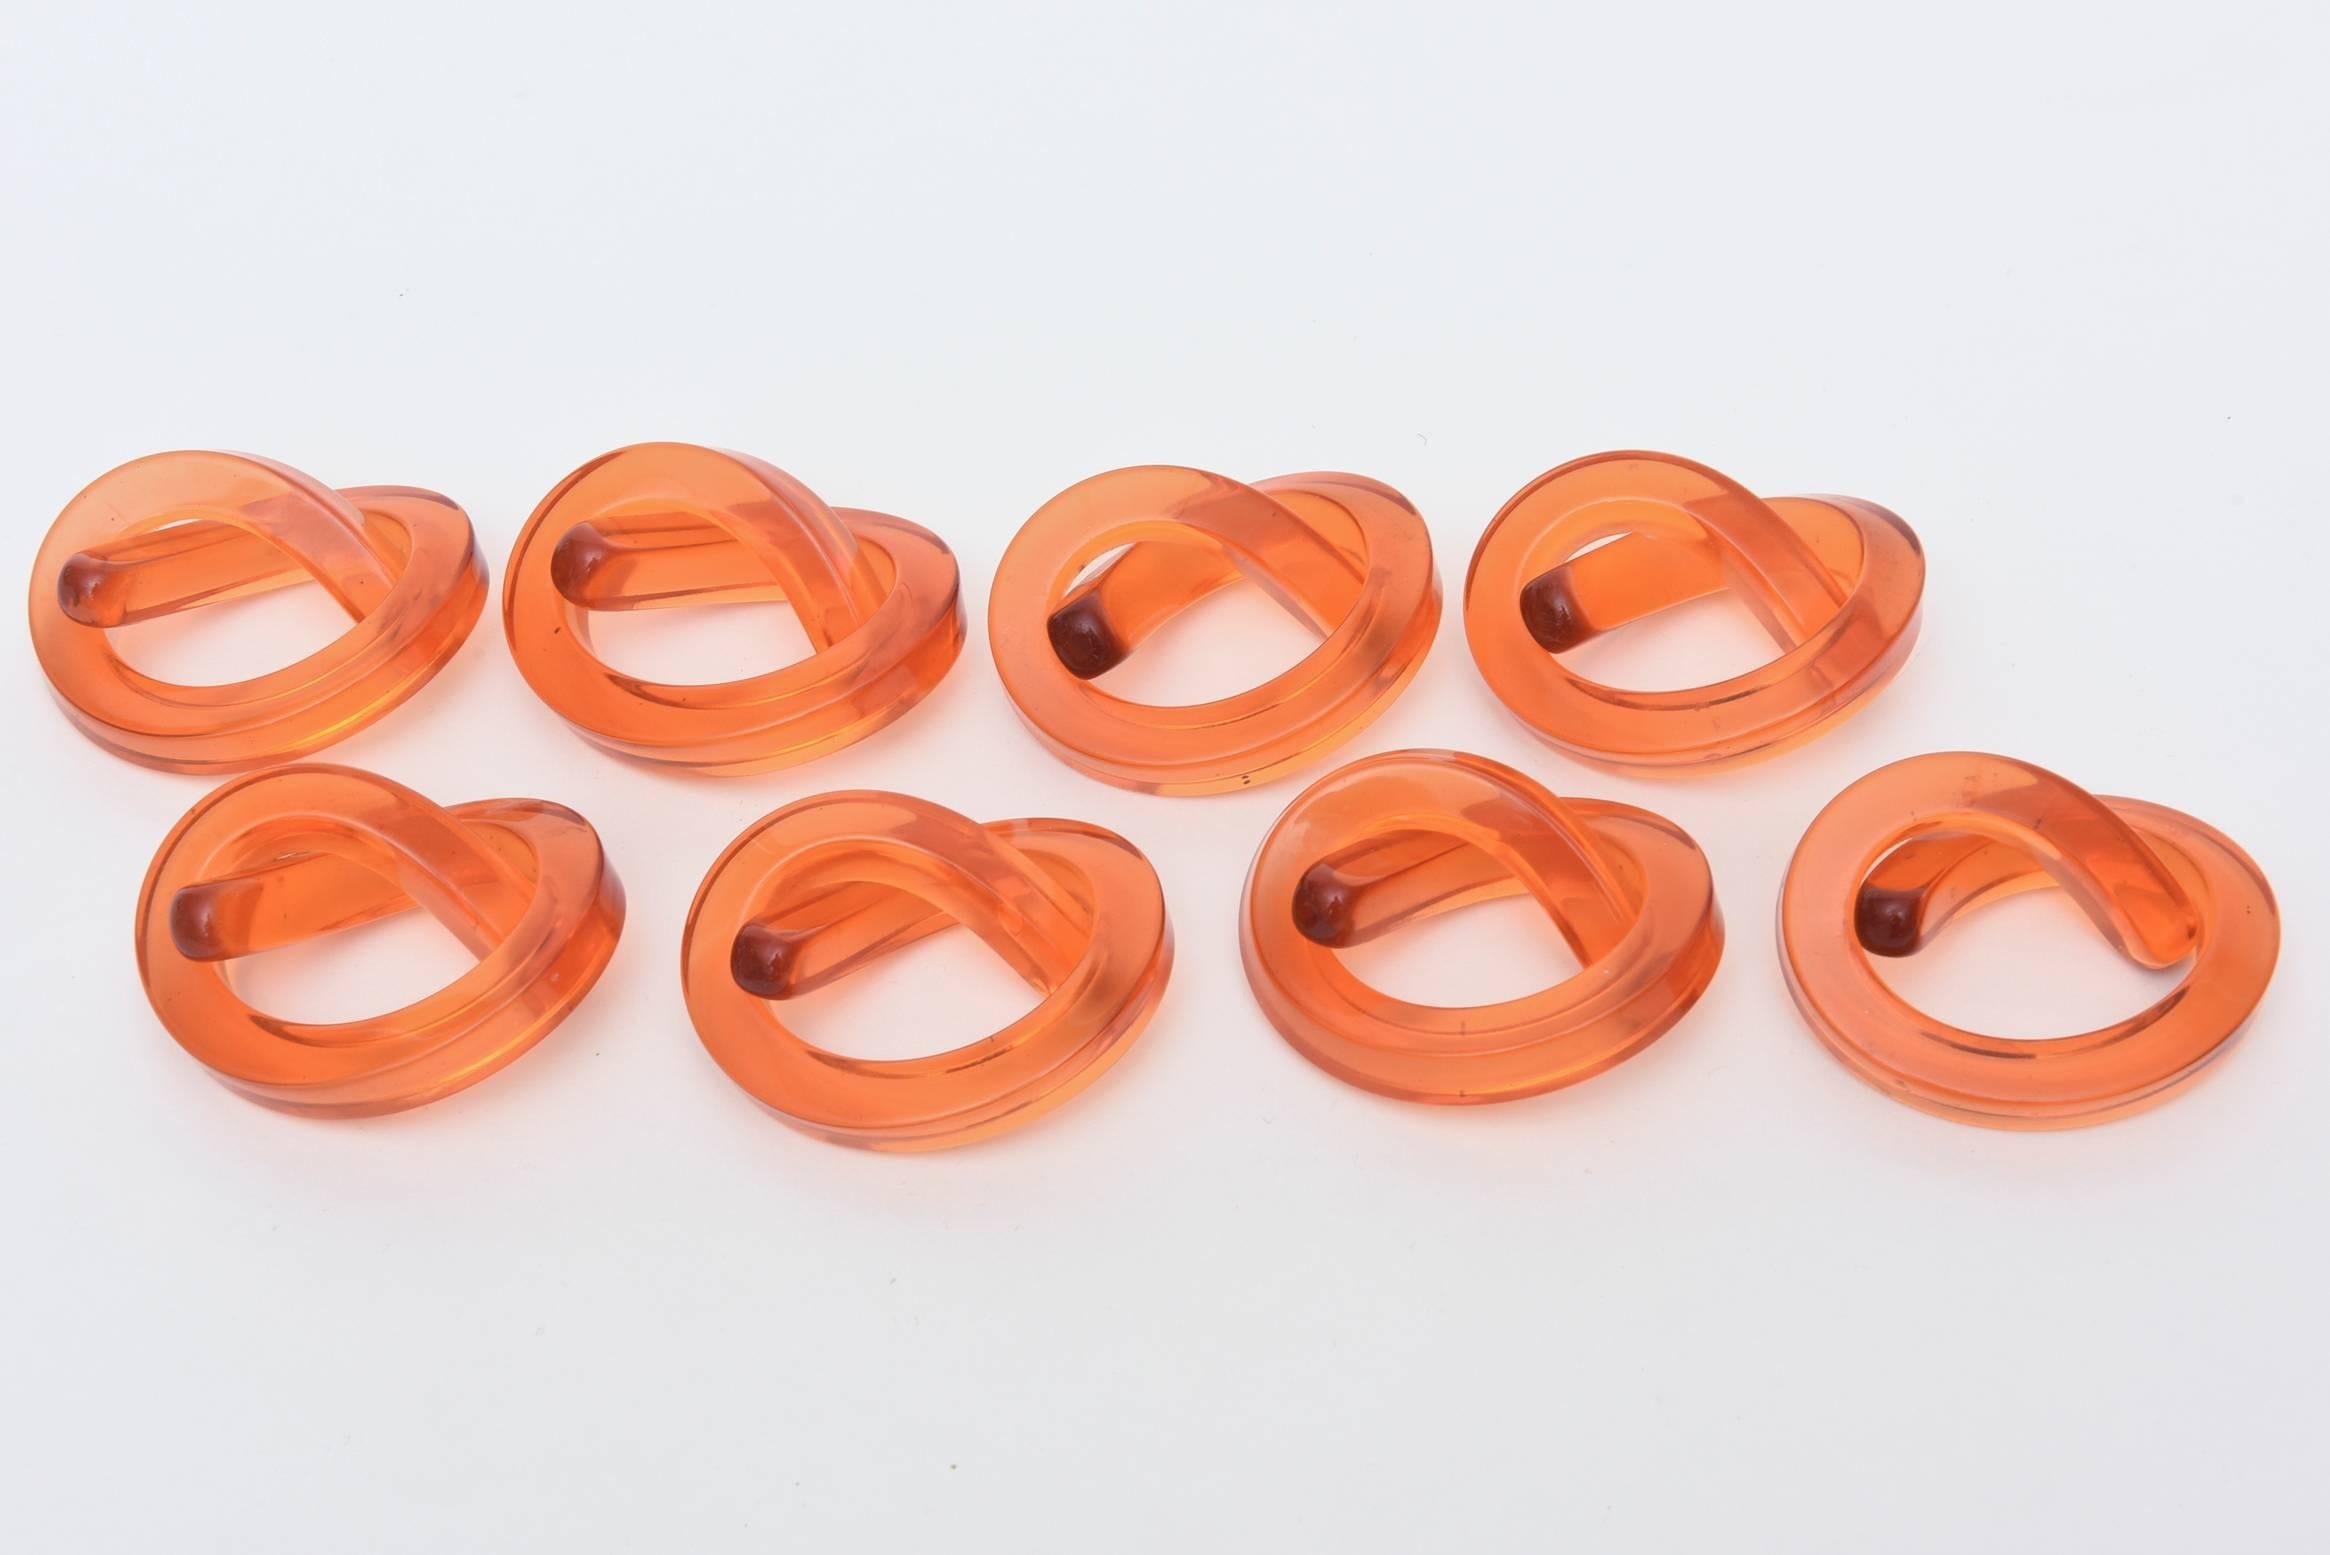 What a great table setting these make with their twisted pretzel shape forms for
napkin rings.
The color is more of a melon orange with some translucency.
These Dorothy Thorpe napkin rings are sculptural Lucite.

NOTE: THESE WILL BE ON THE